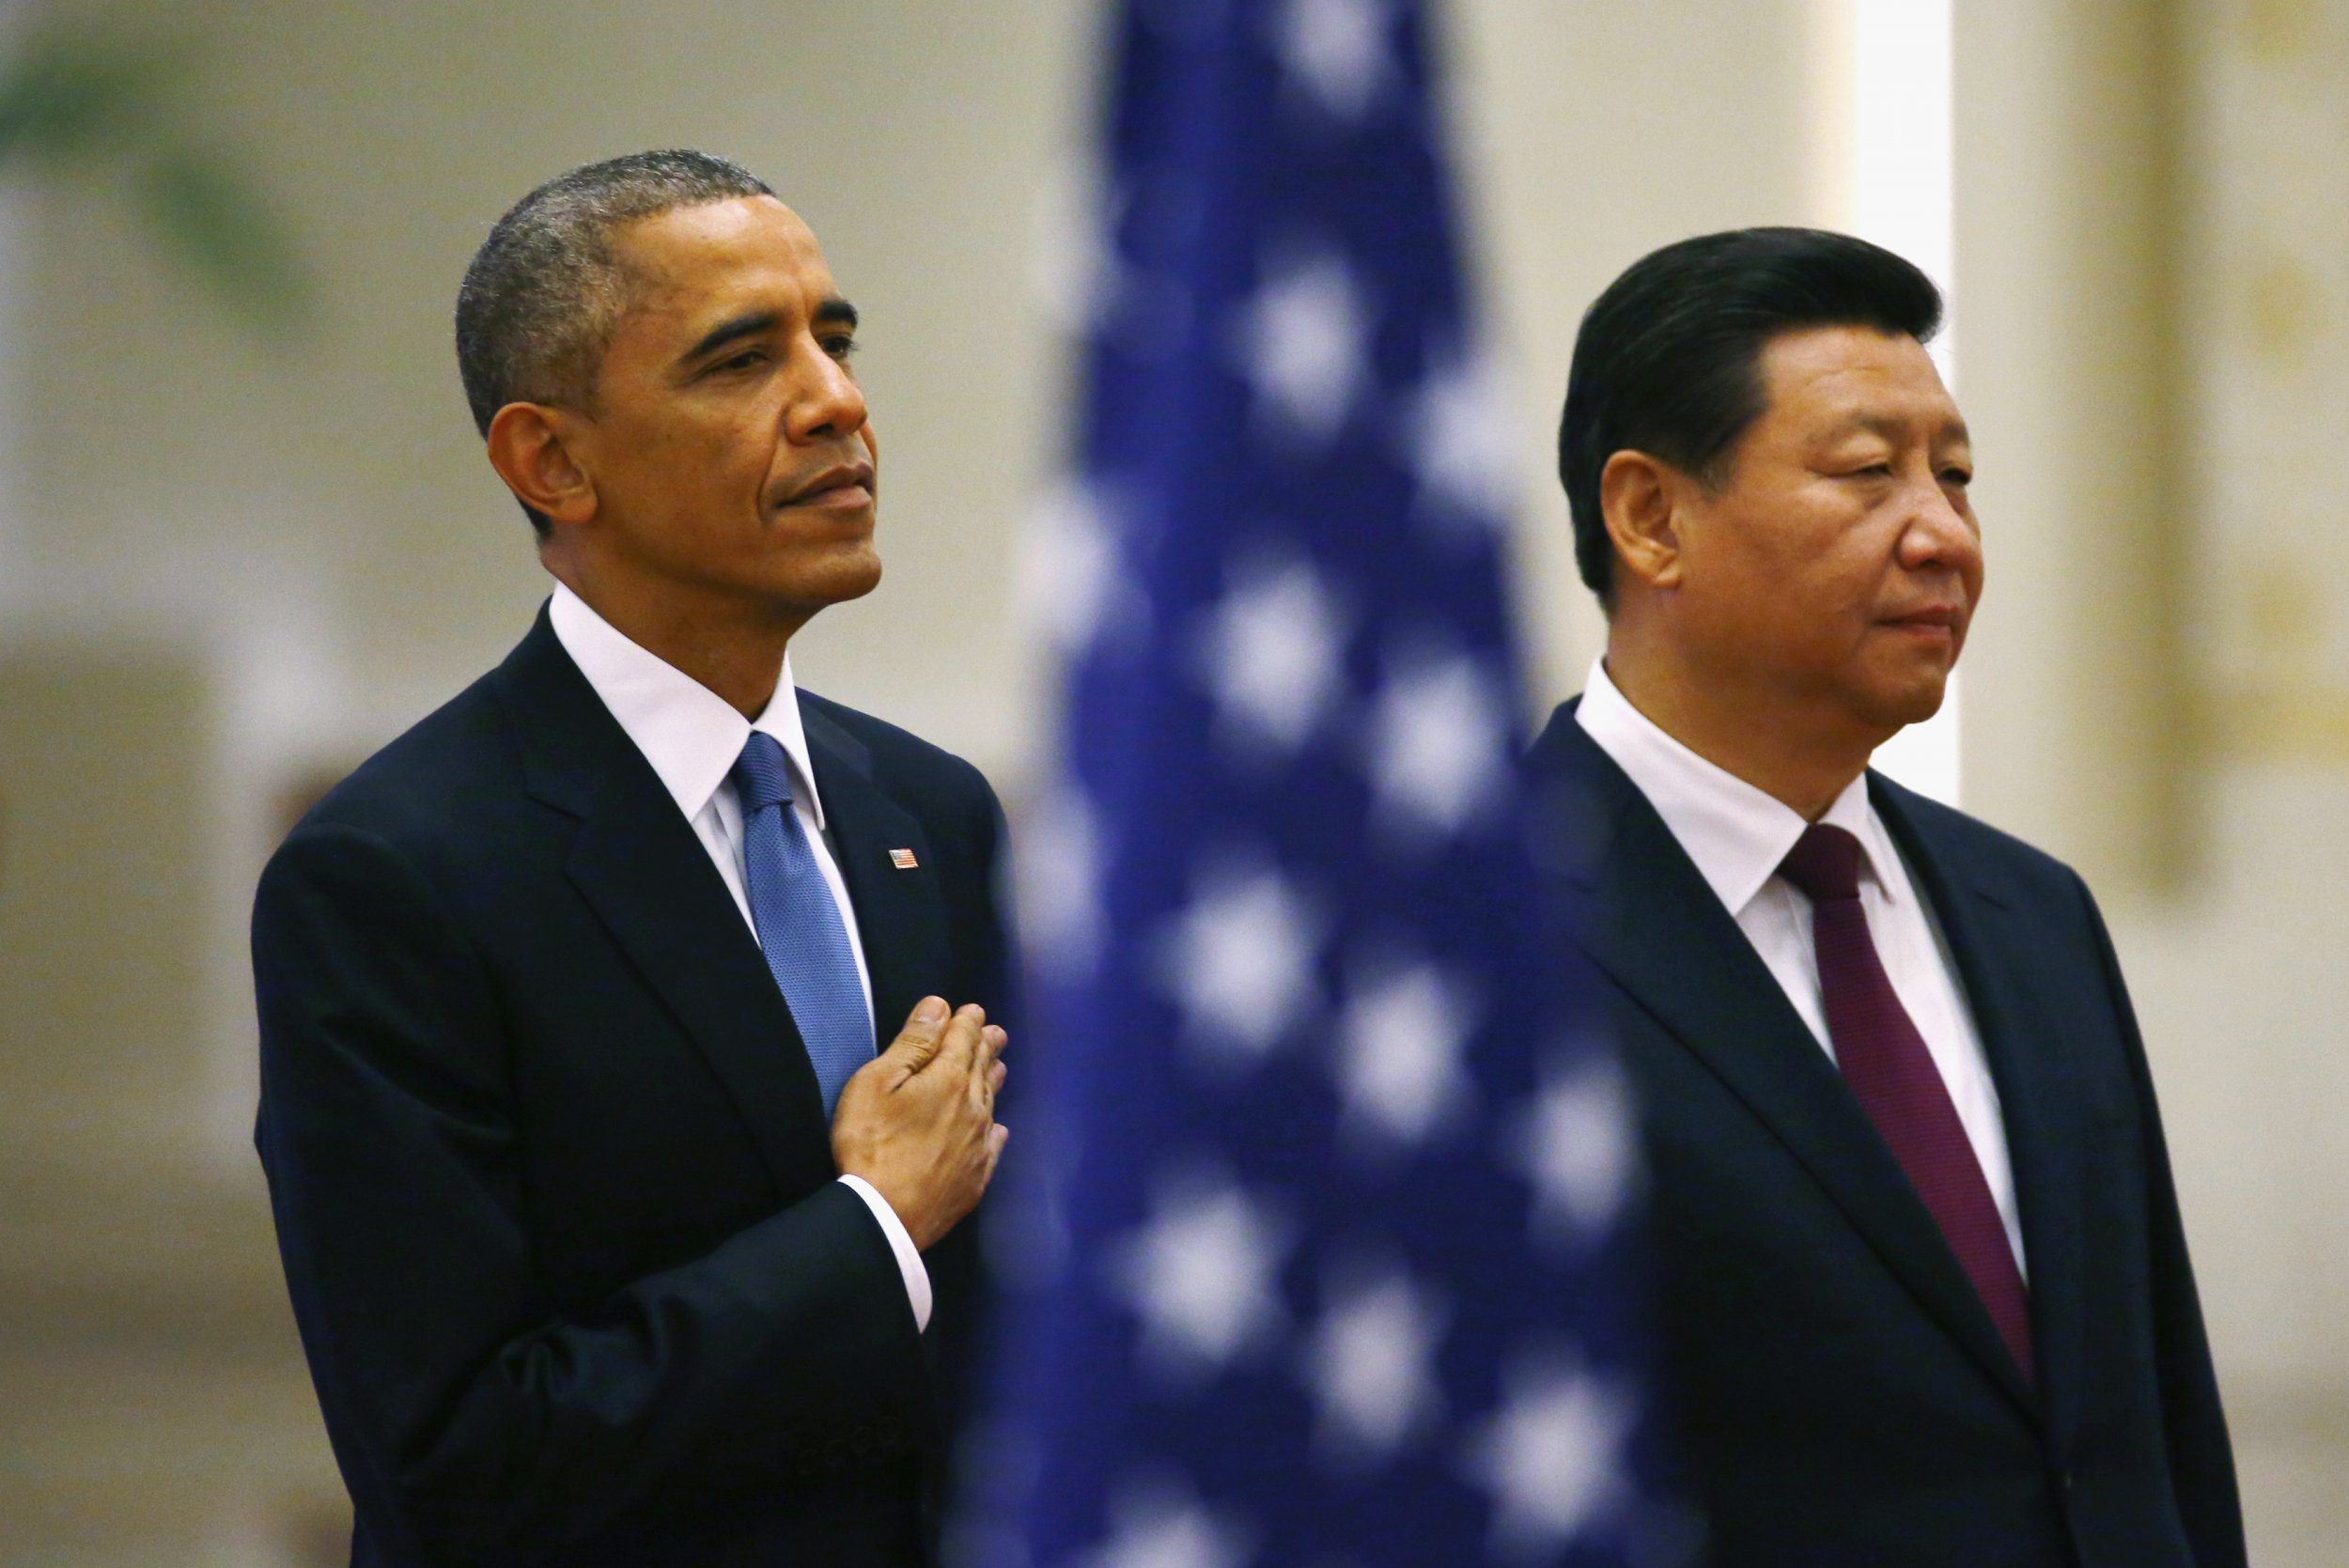 Obama and Jinping